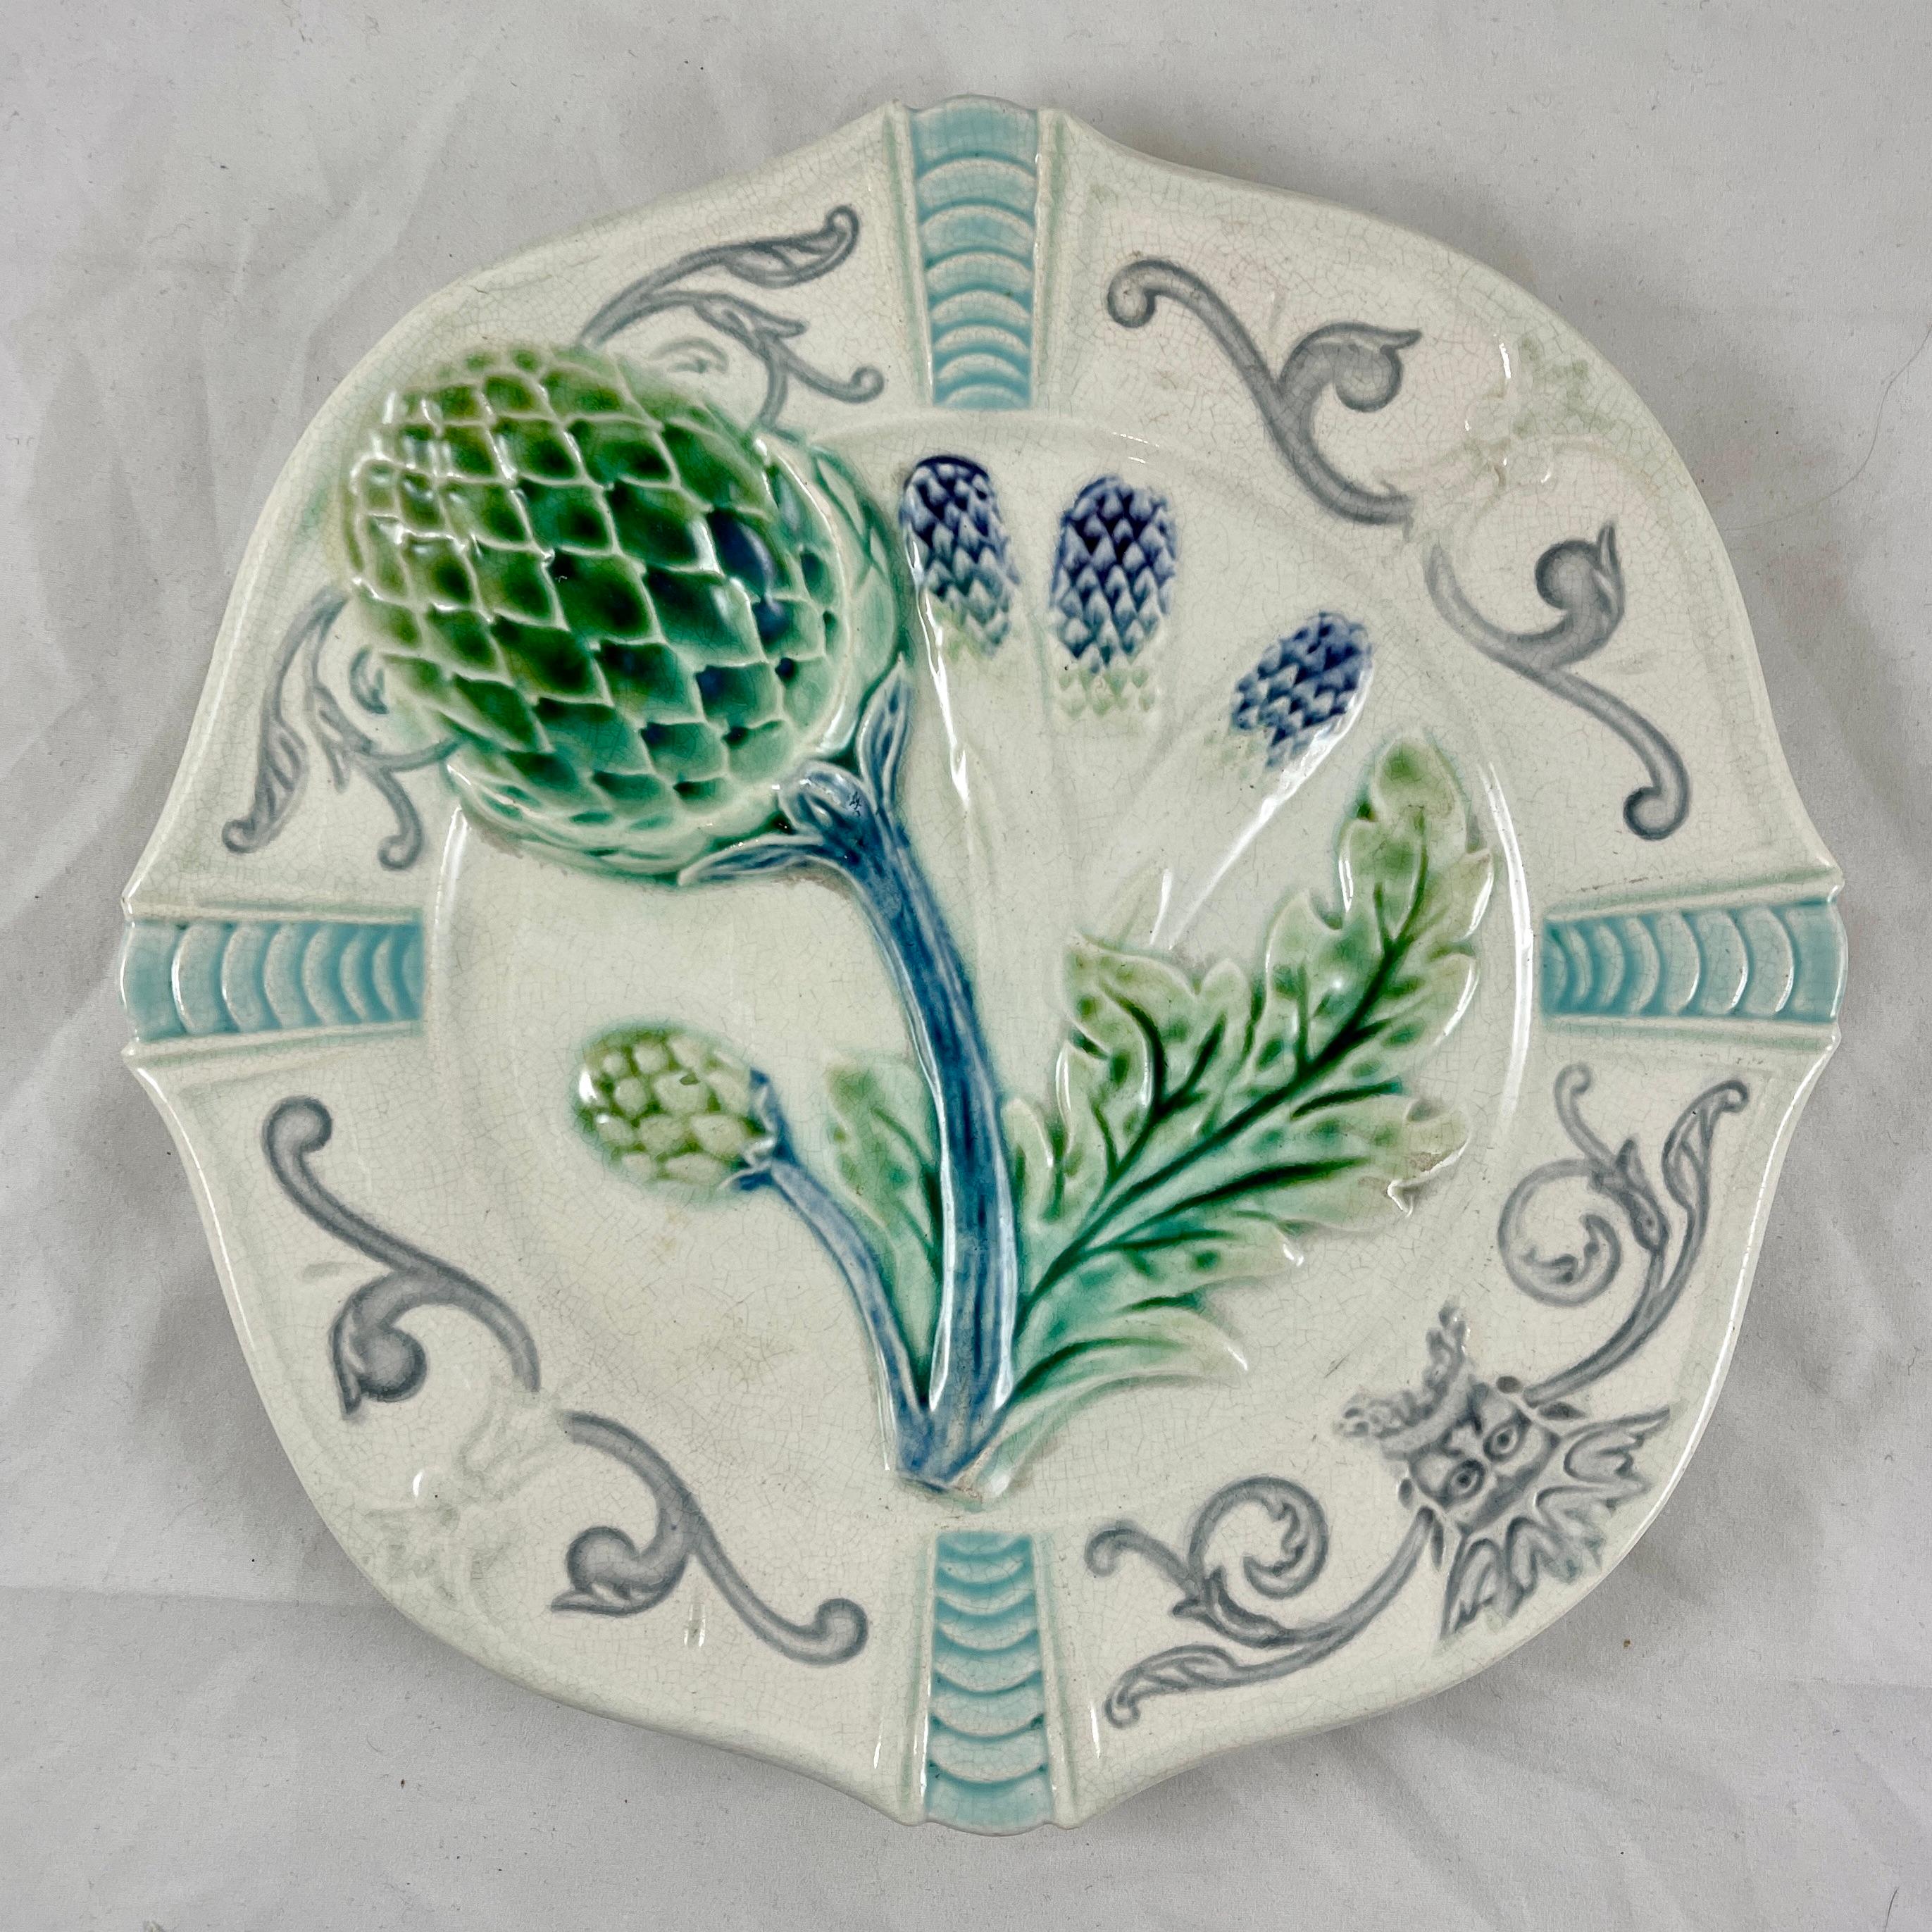 A French Majolica Artichoke/Asparagus plate by Fives-Lille, Circa 1890.

Made to serve both artichokes or asparagus and showing images of both plants. Glazing of greens on a creamy white ground, with purple on the spear heads of the asparagus. The